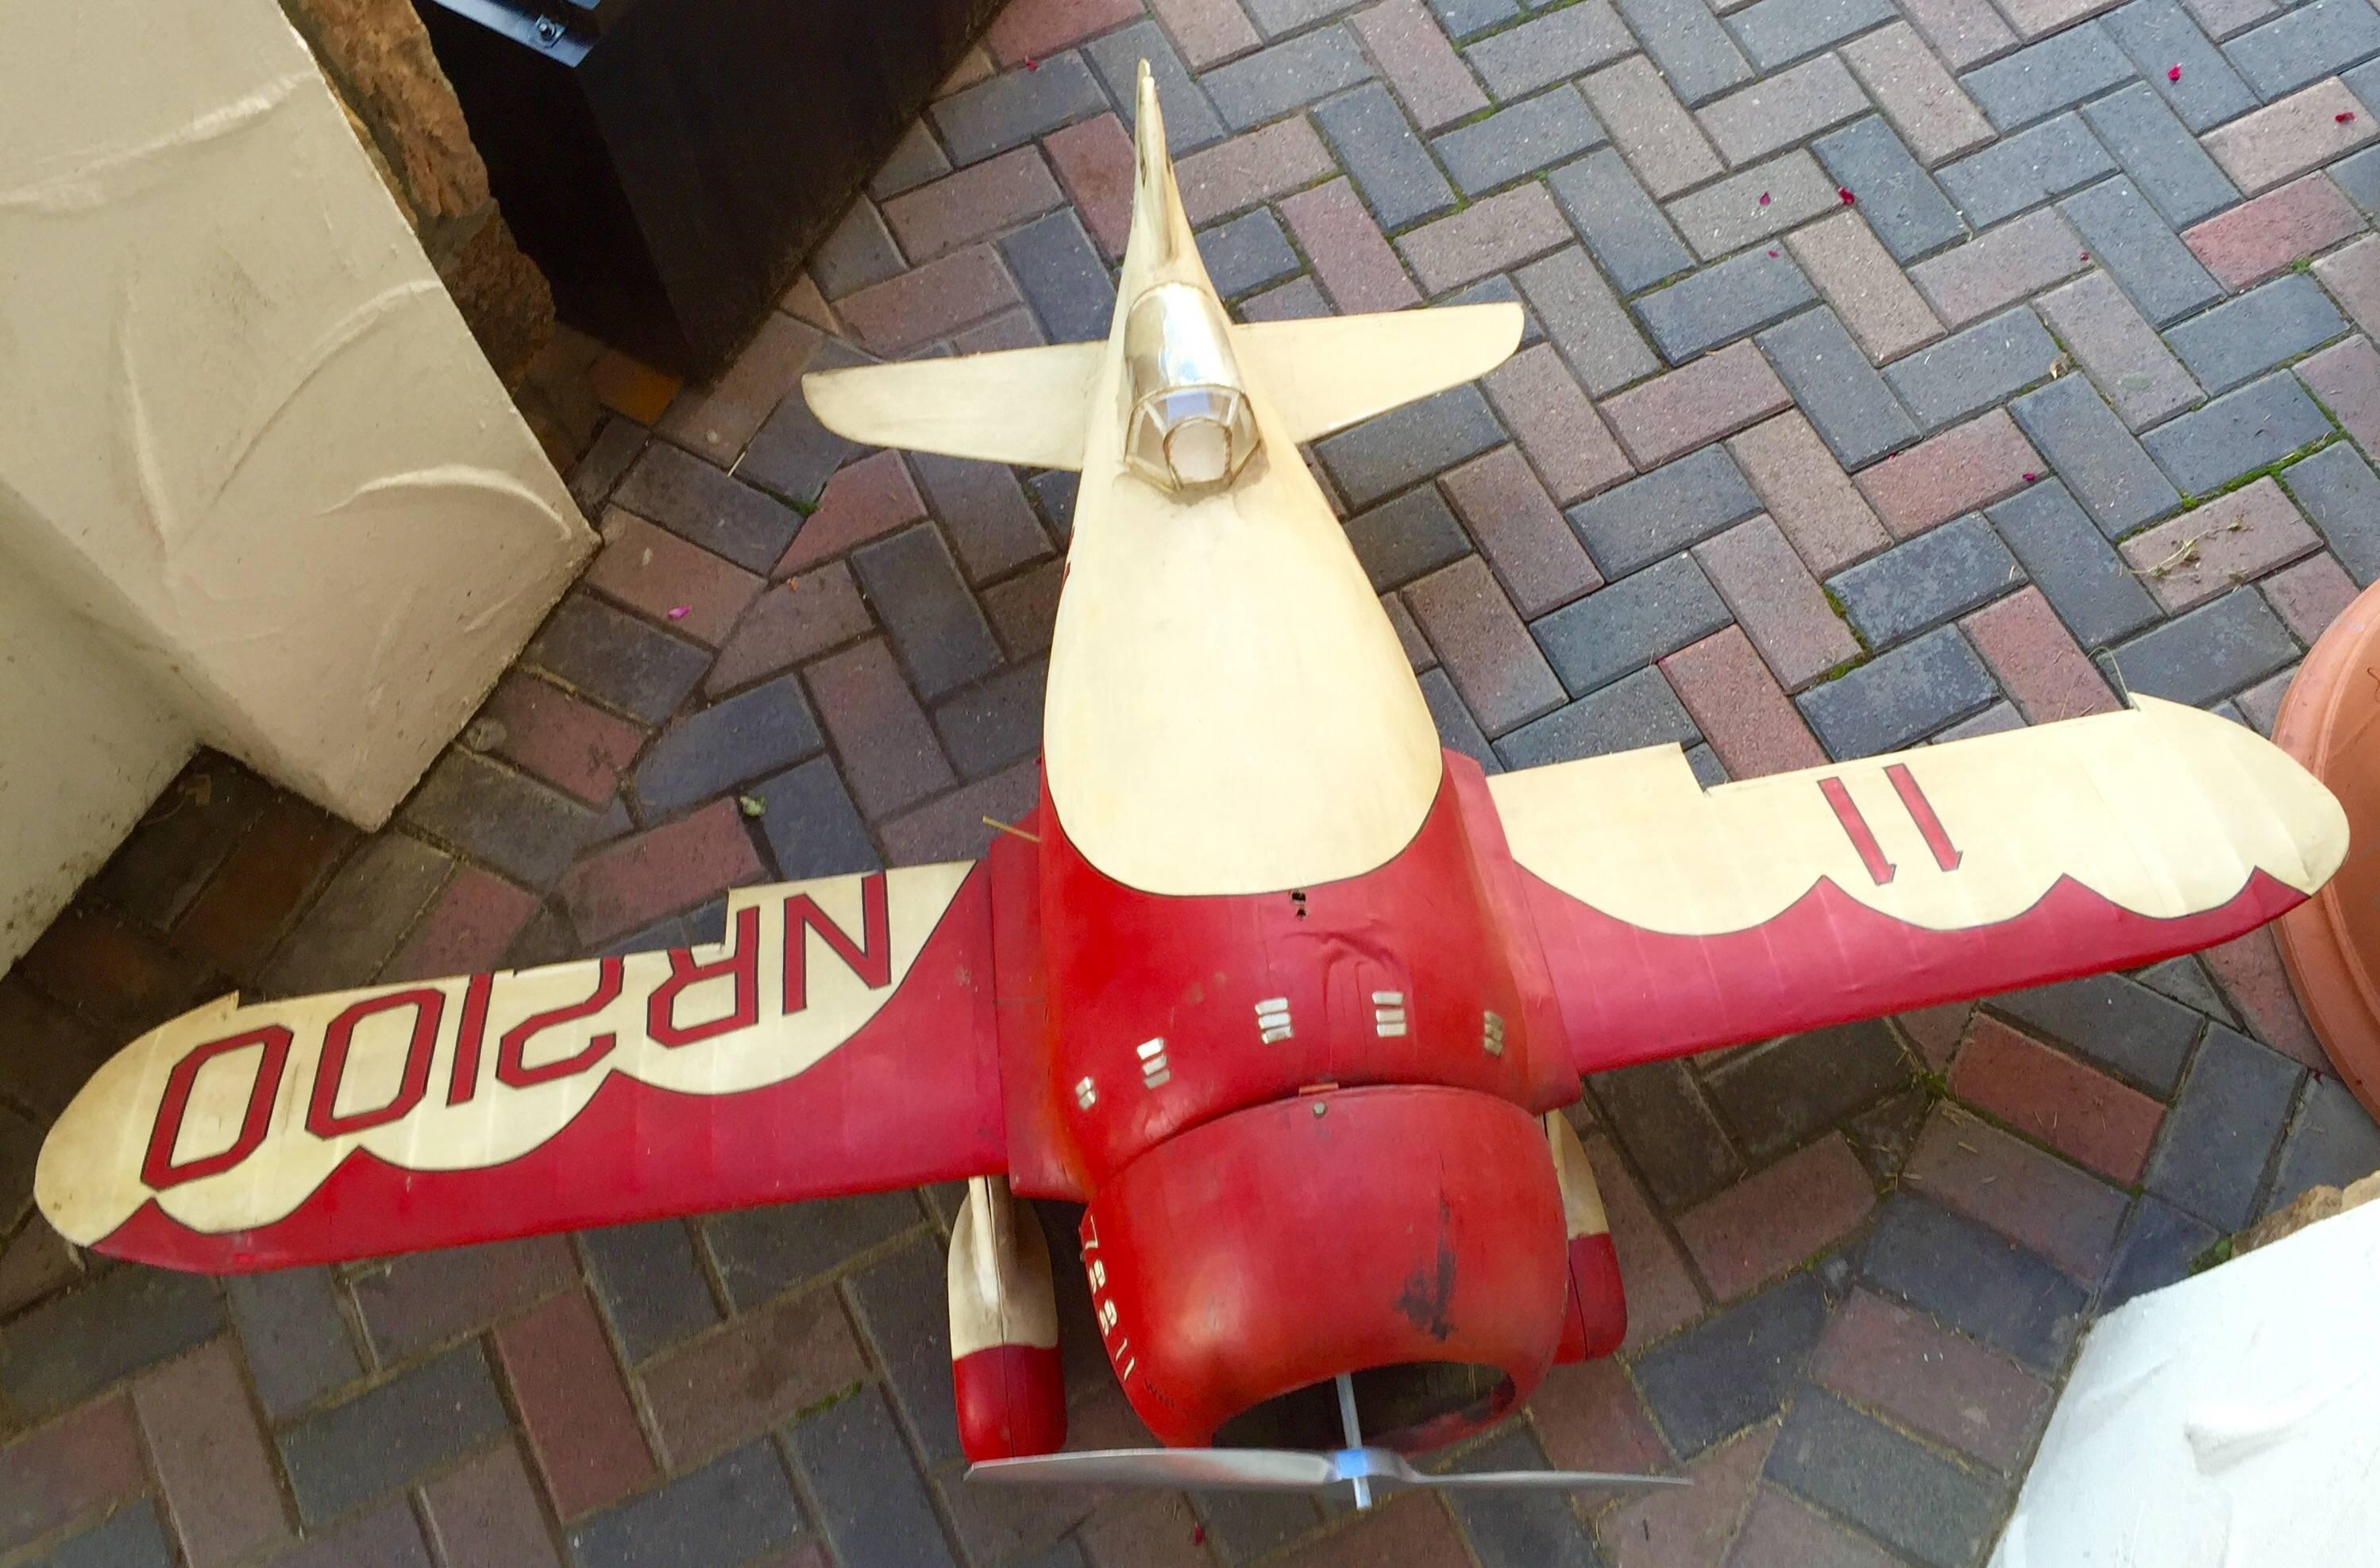 Folk Art Large 1940s Airplane Model Wood and Paper Gee Bee